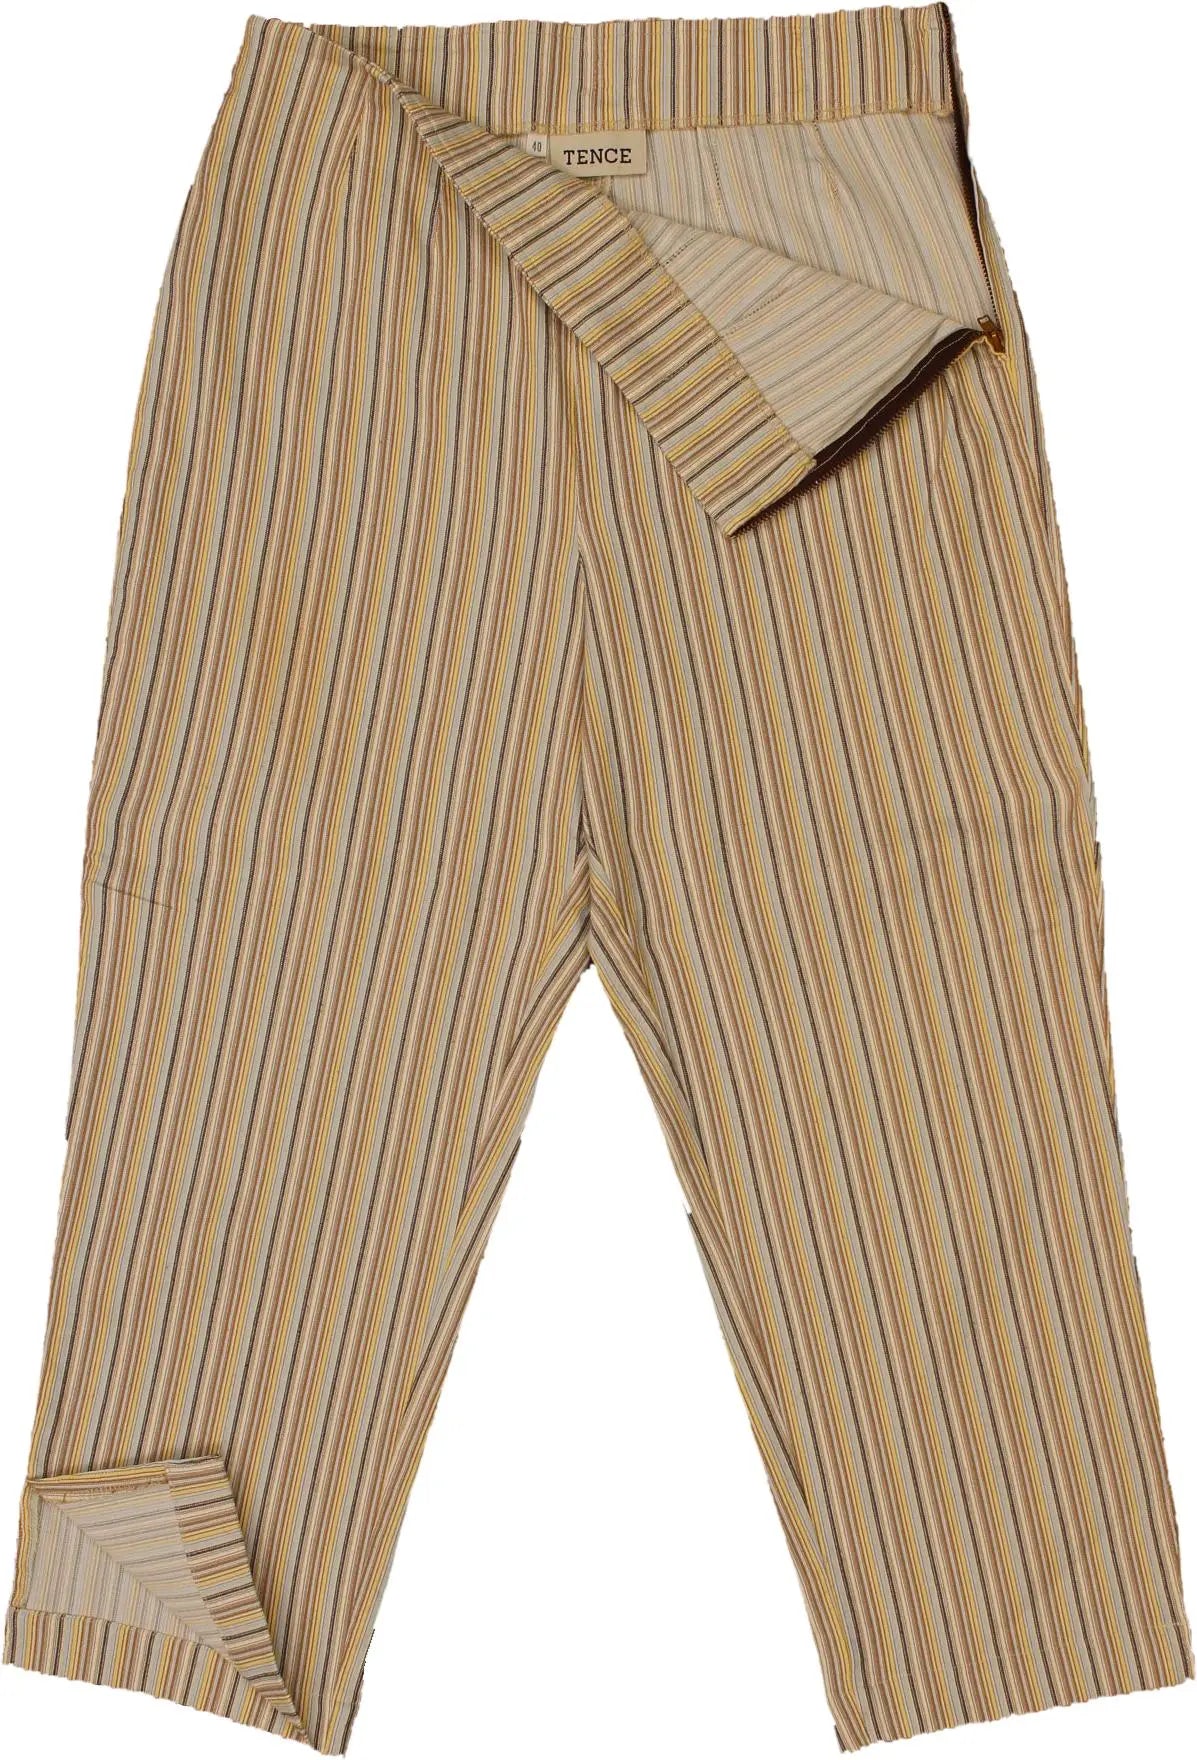 Tence - Striped Capri Pants- ThriftTale.com - Vintage and second handclothing